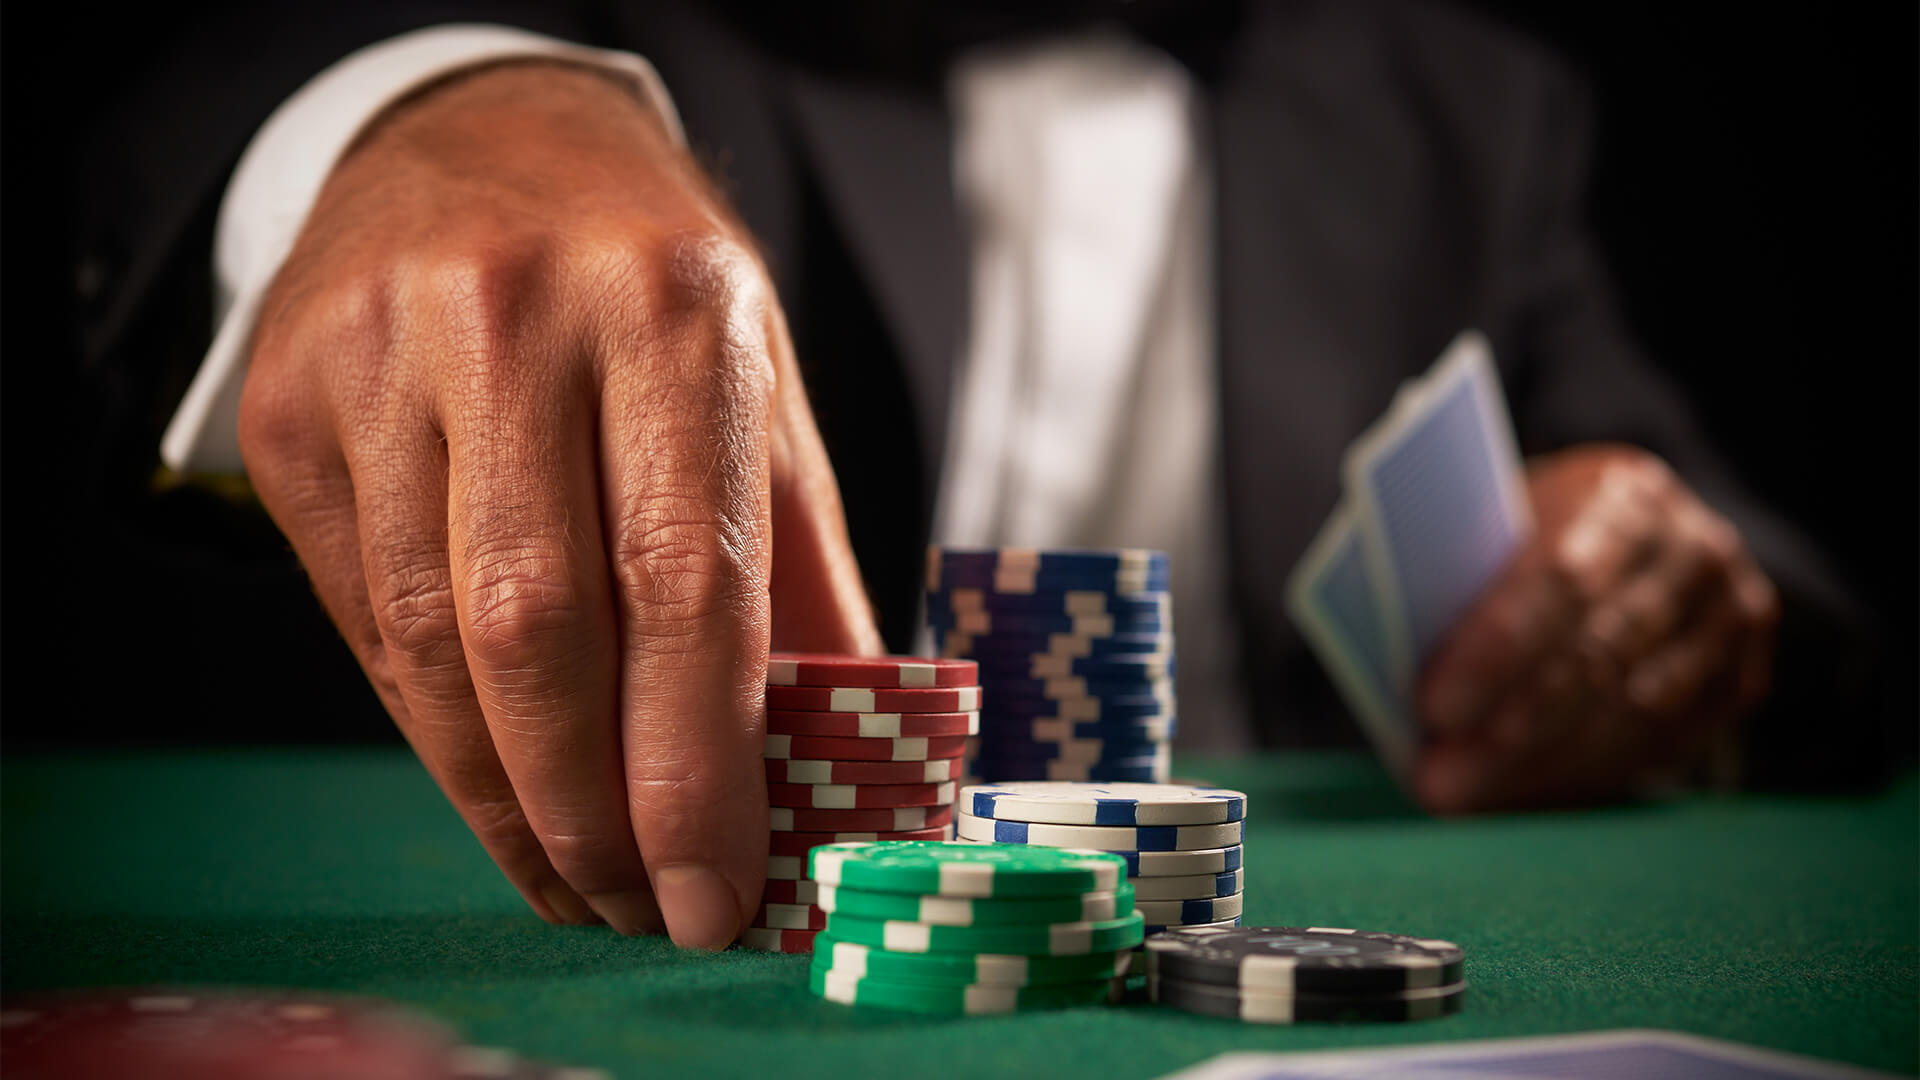 10 TIPS TO PLAY POKER LIKE A PRO